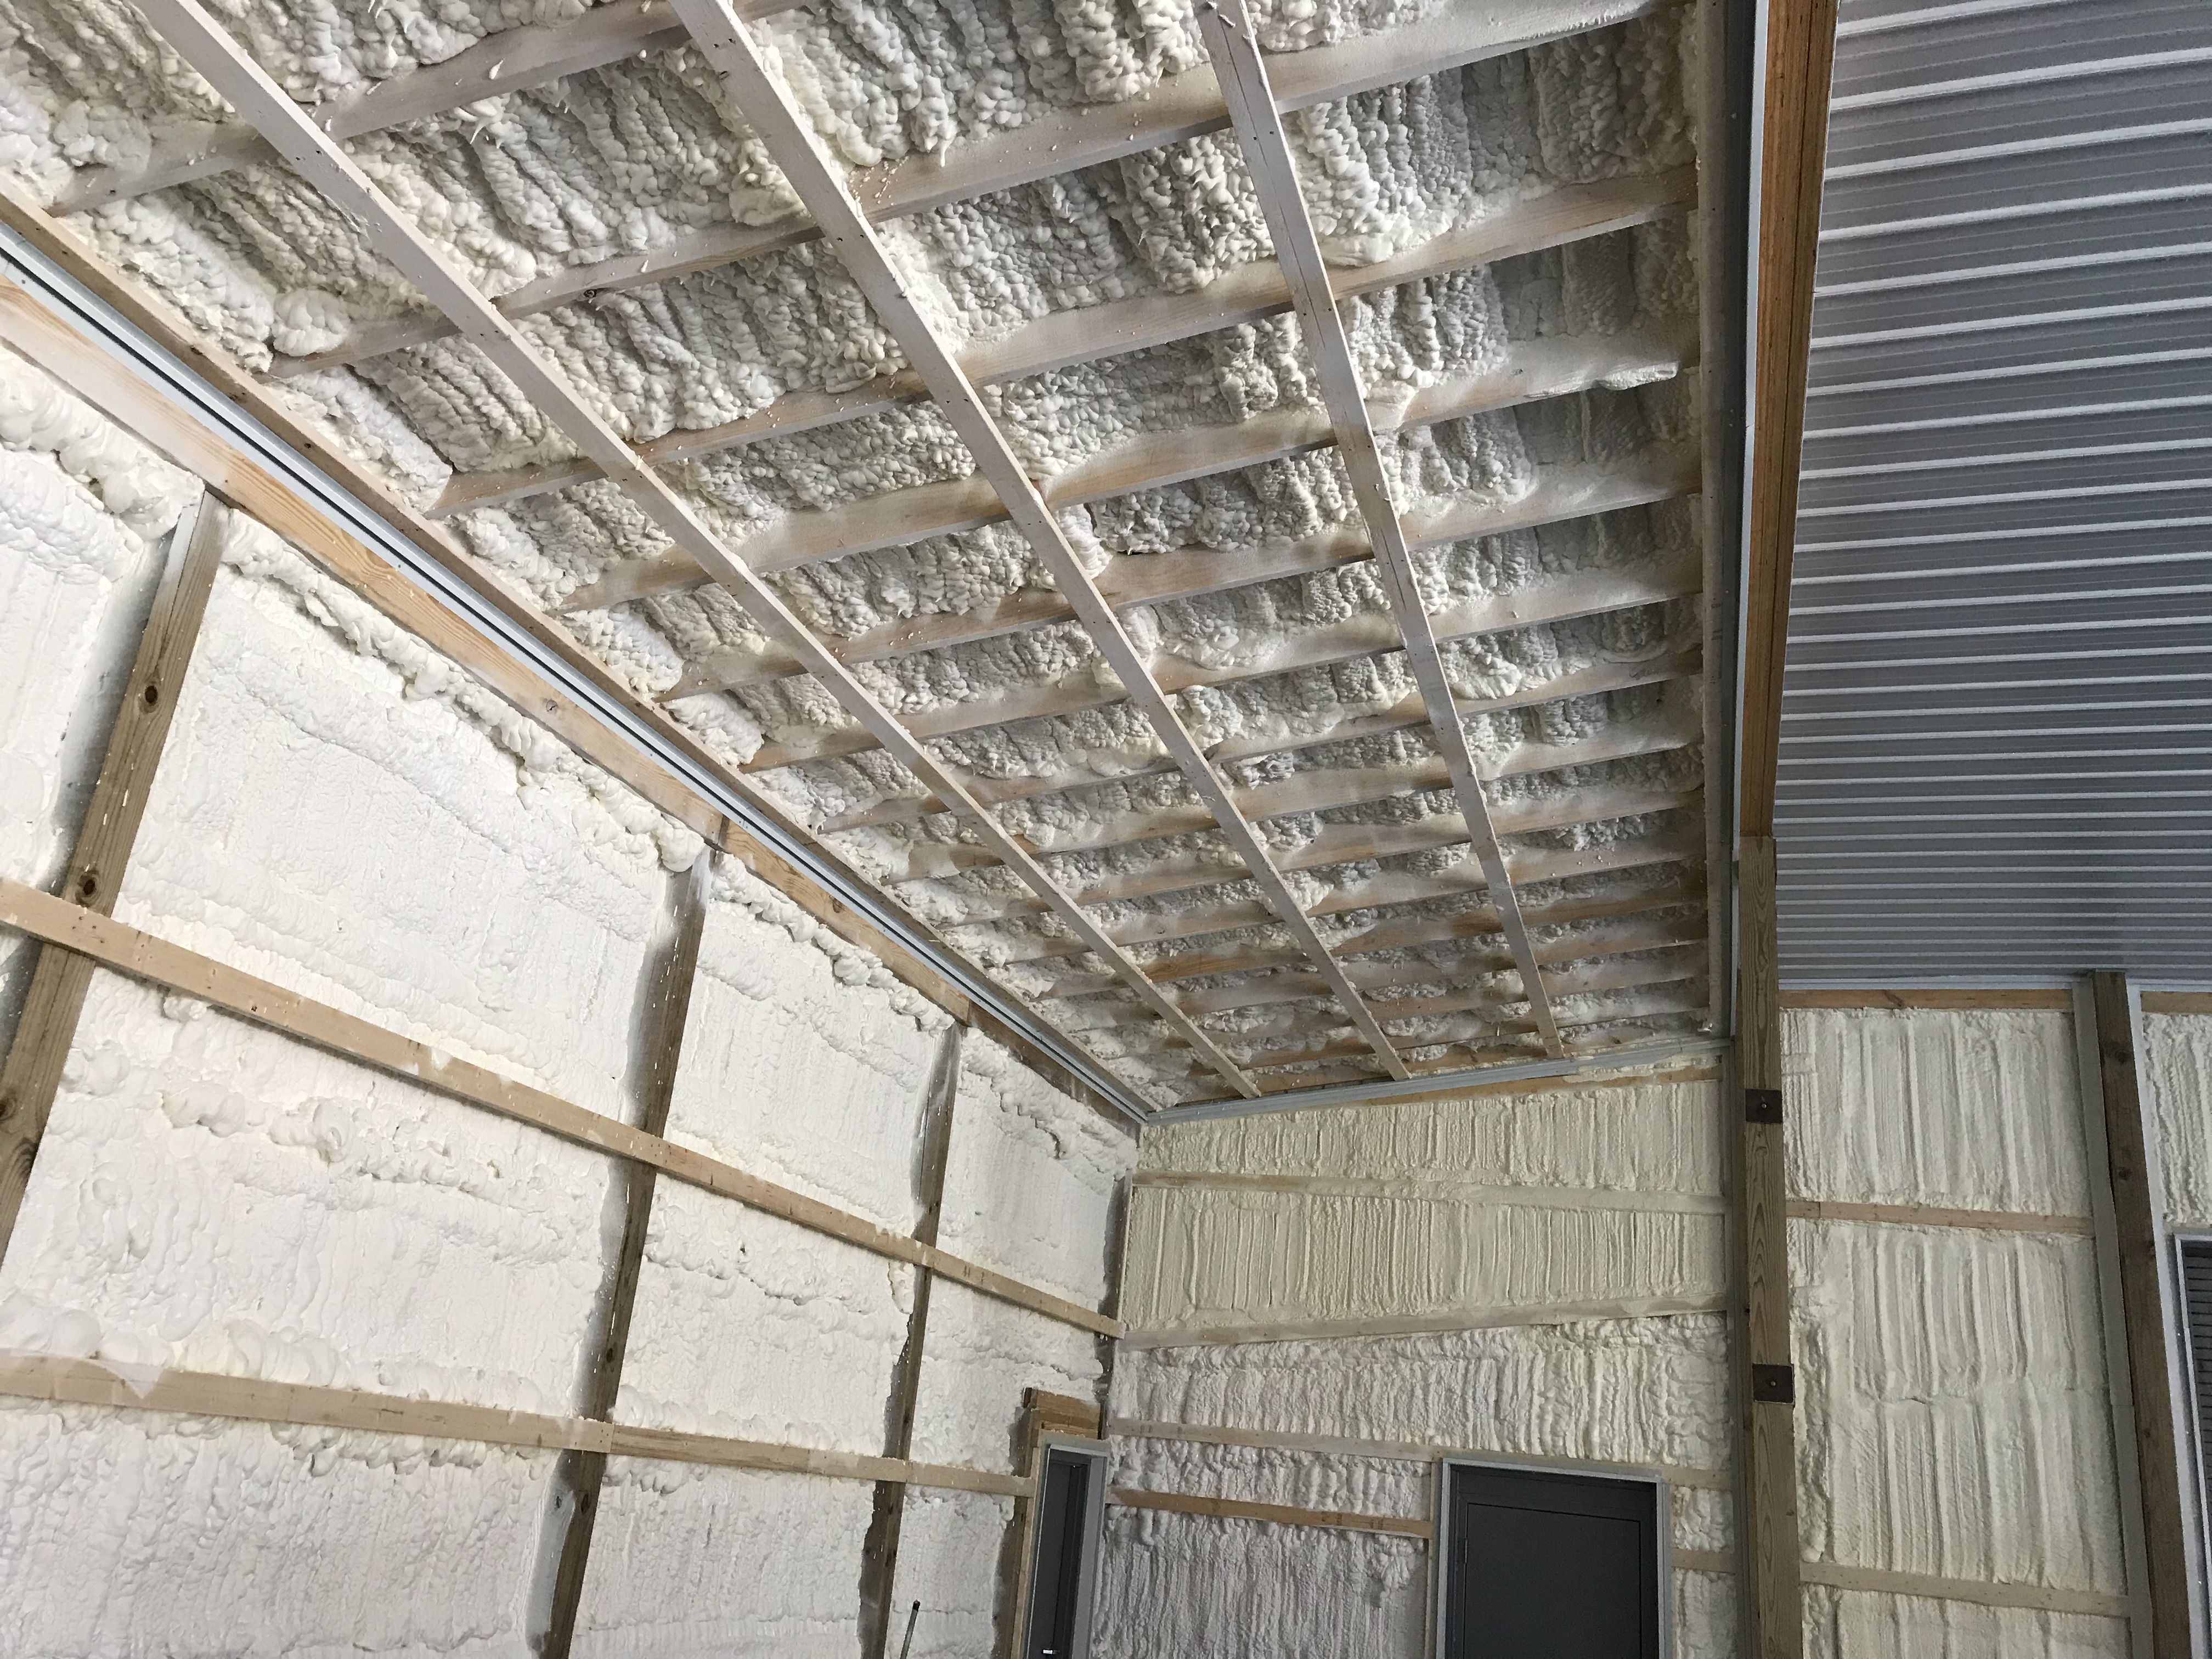 Wall and Ceiling After Insulation